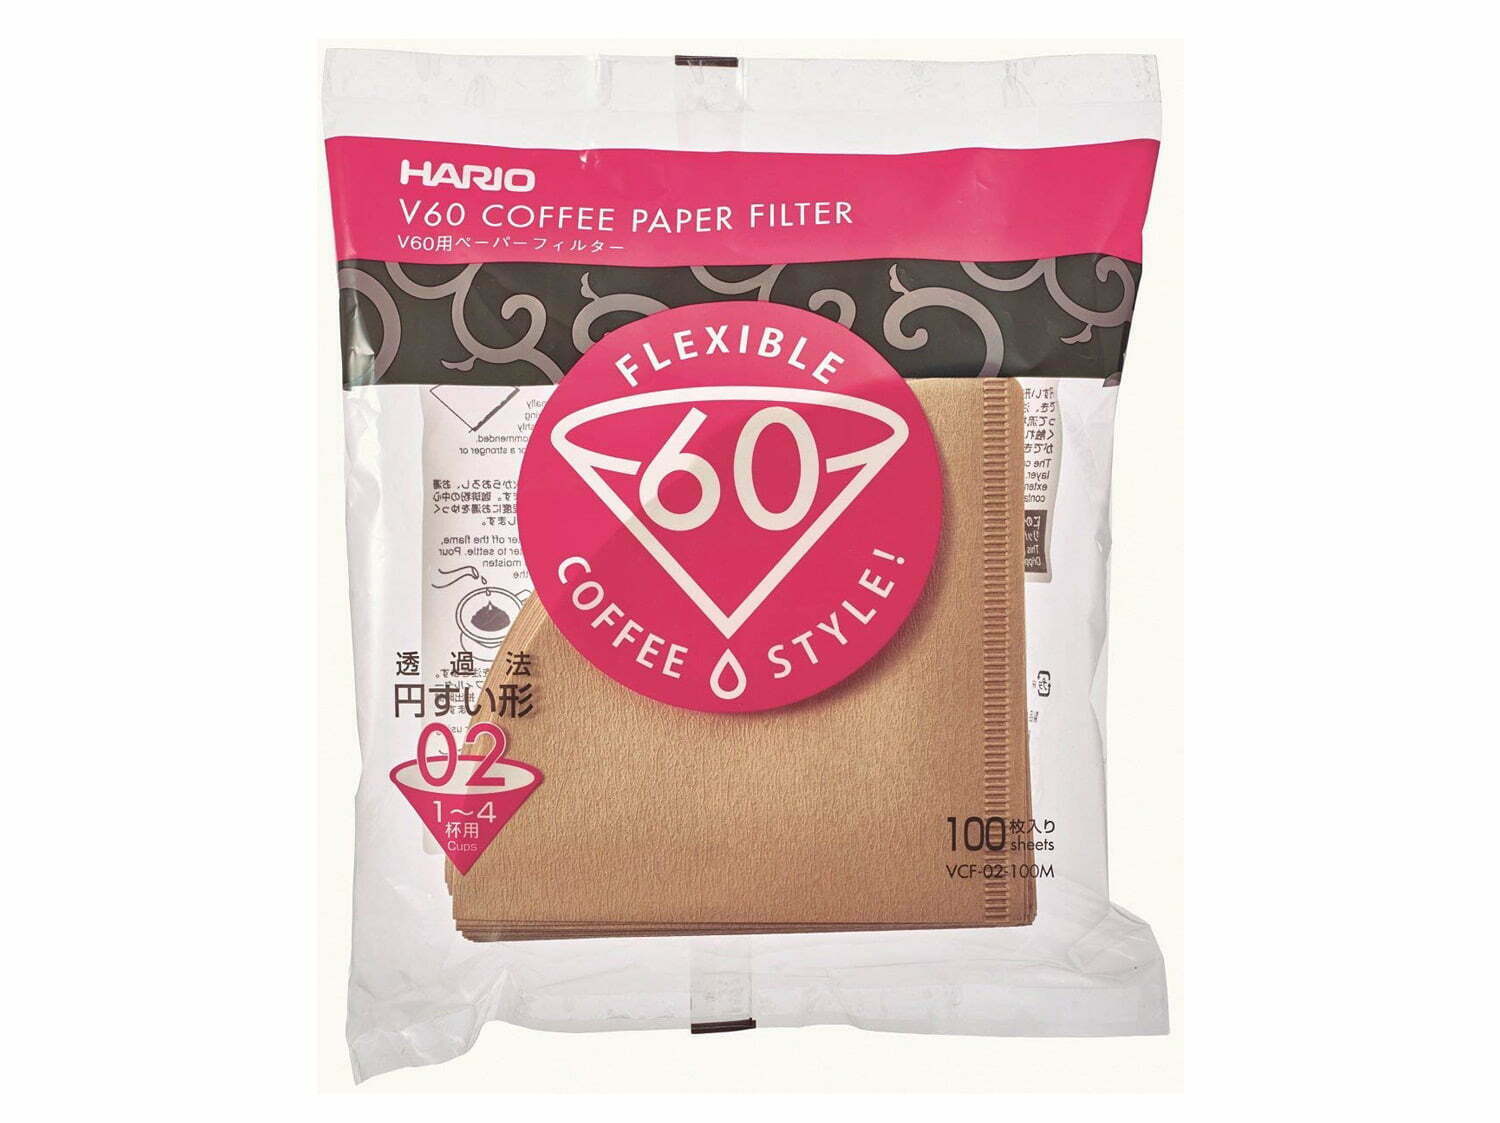 Hario V60 Paper Coffee Filters, Size 02, Natural, Tabbed